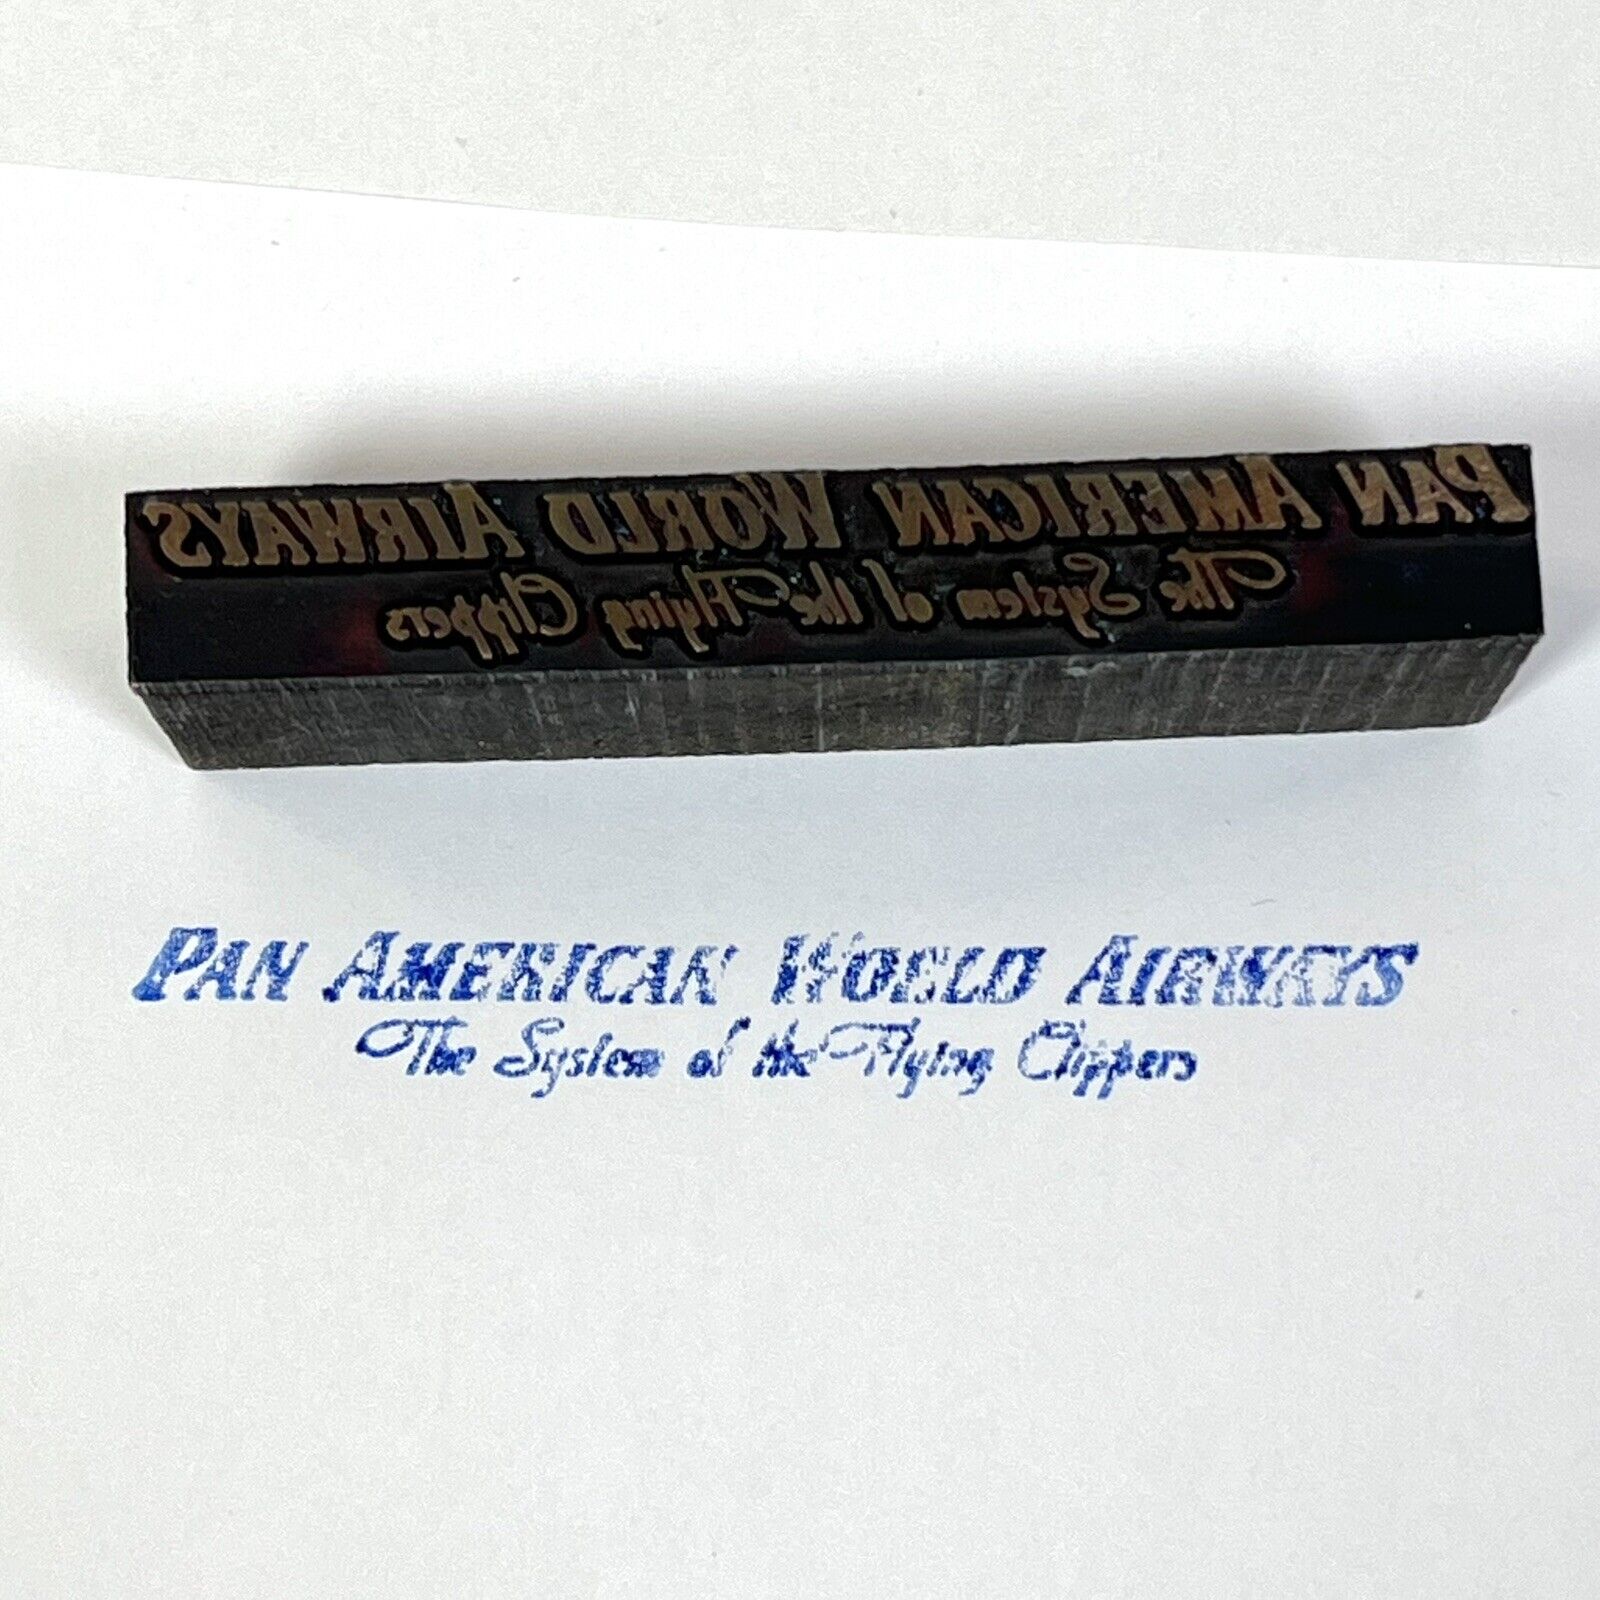 Pan American World Airways - Flying Clippers Logo Letterpress Print Plate Stamp